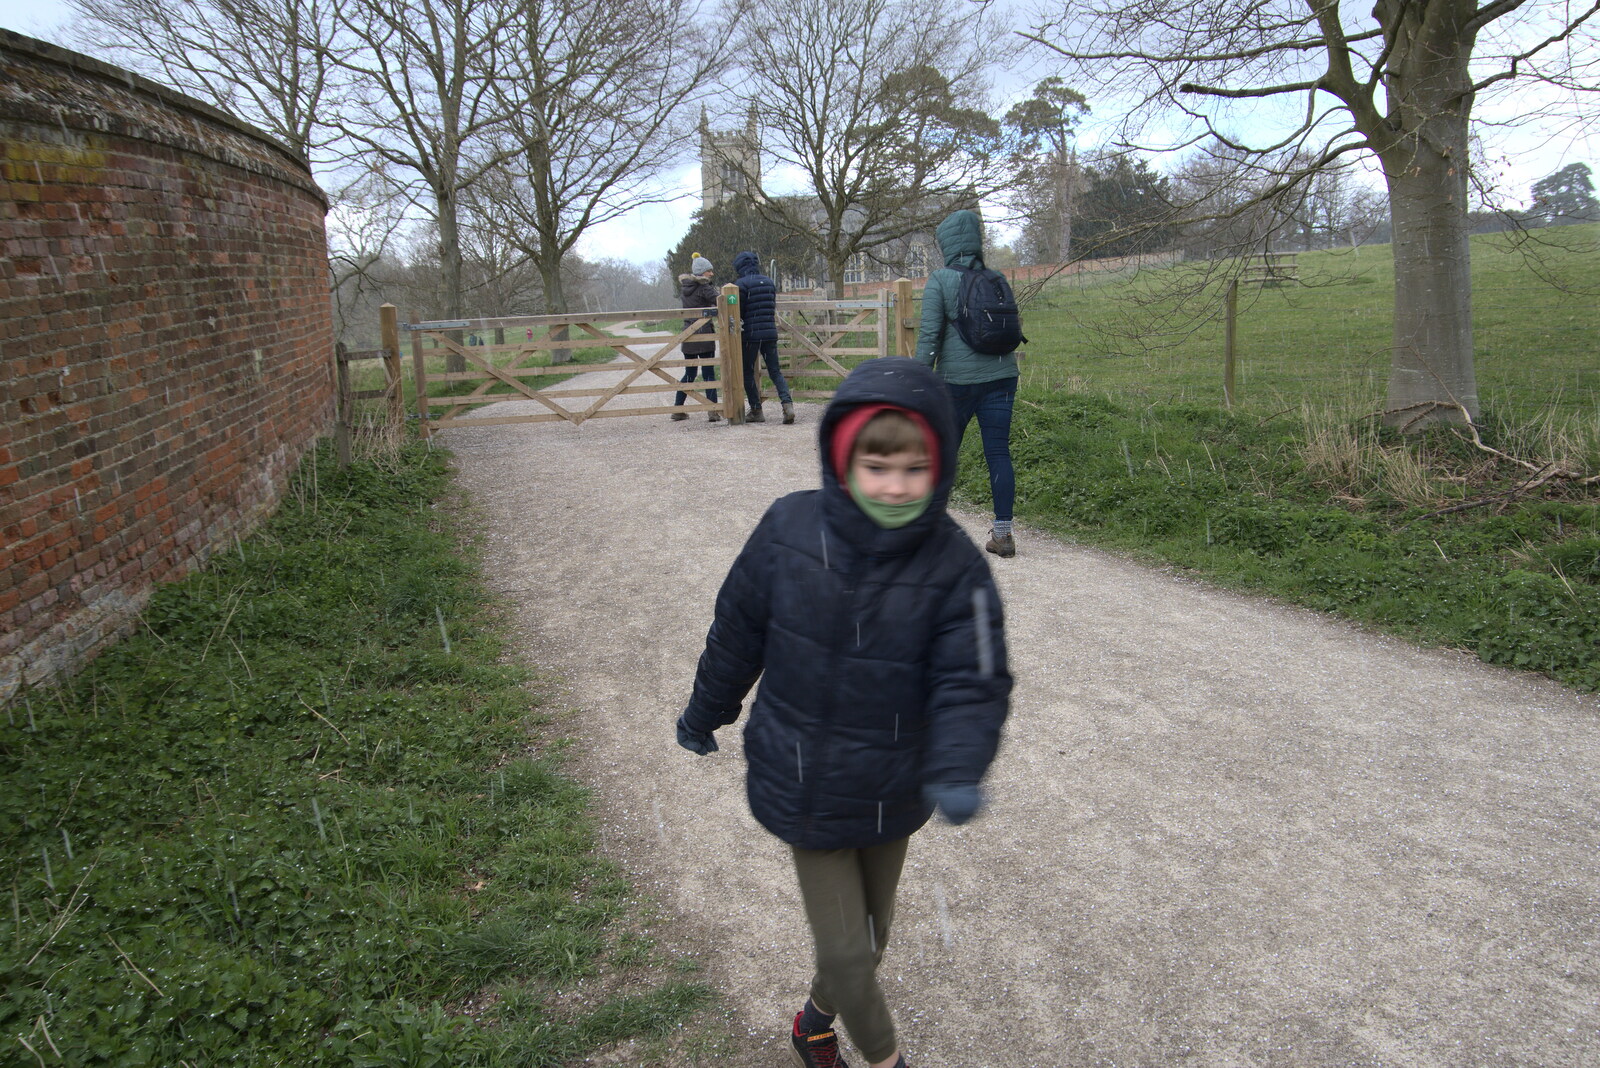 Harry does some moves as it starts to snow from A Return to Ickworth House, Horringer, Suffolk - 11th April 2021